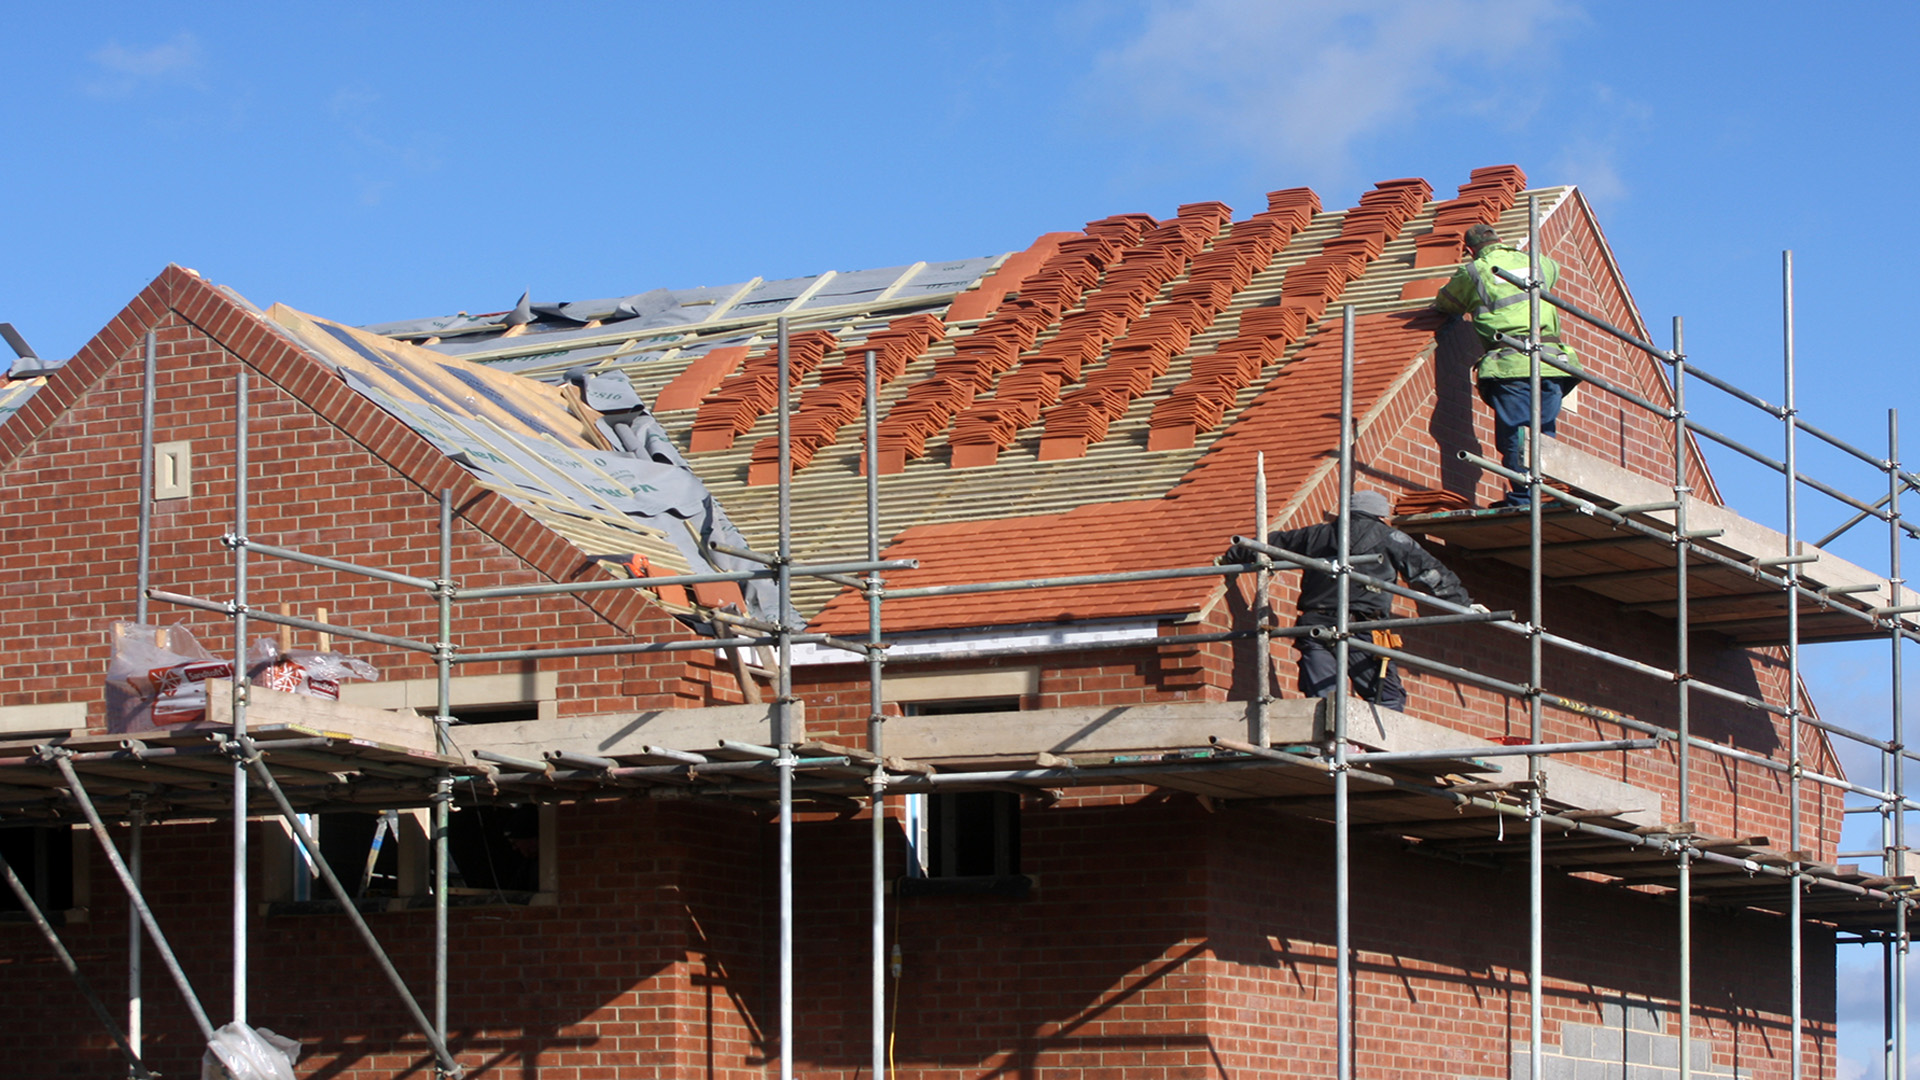 Roofing work happening on a south tynedie building